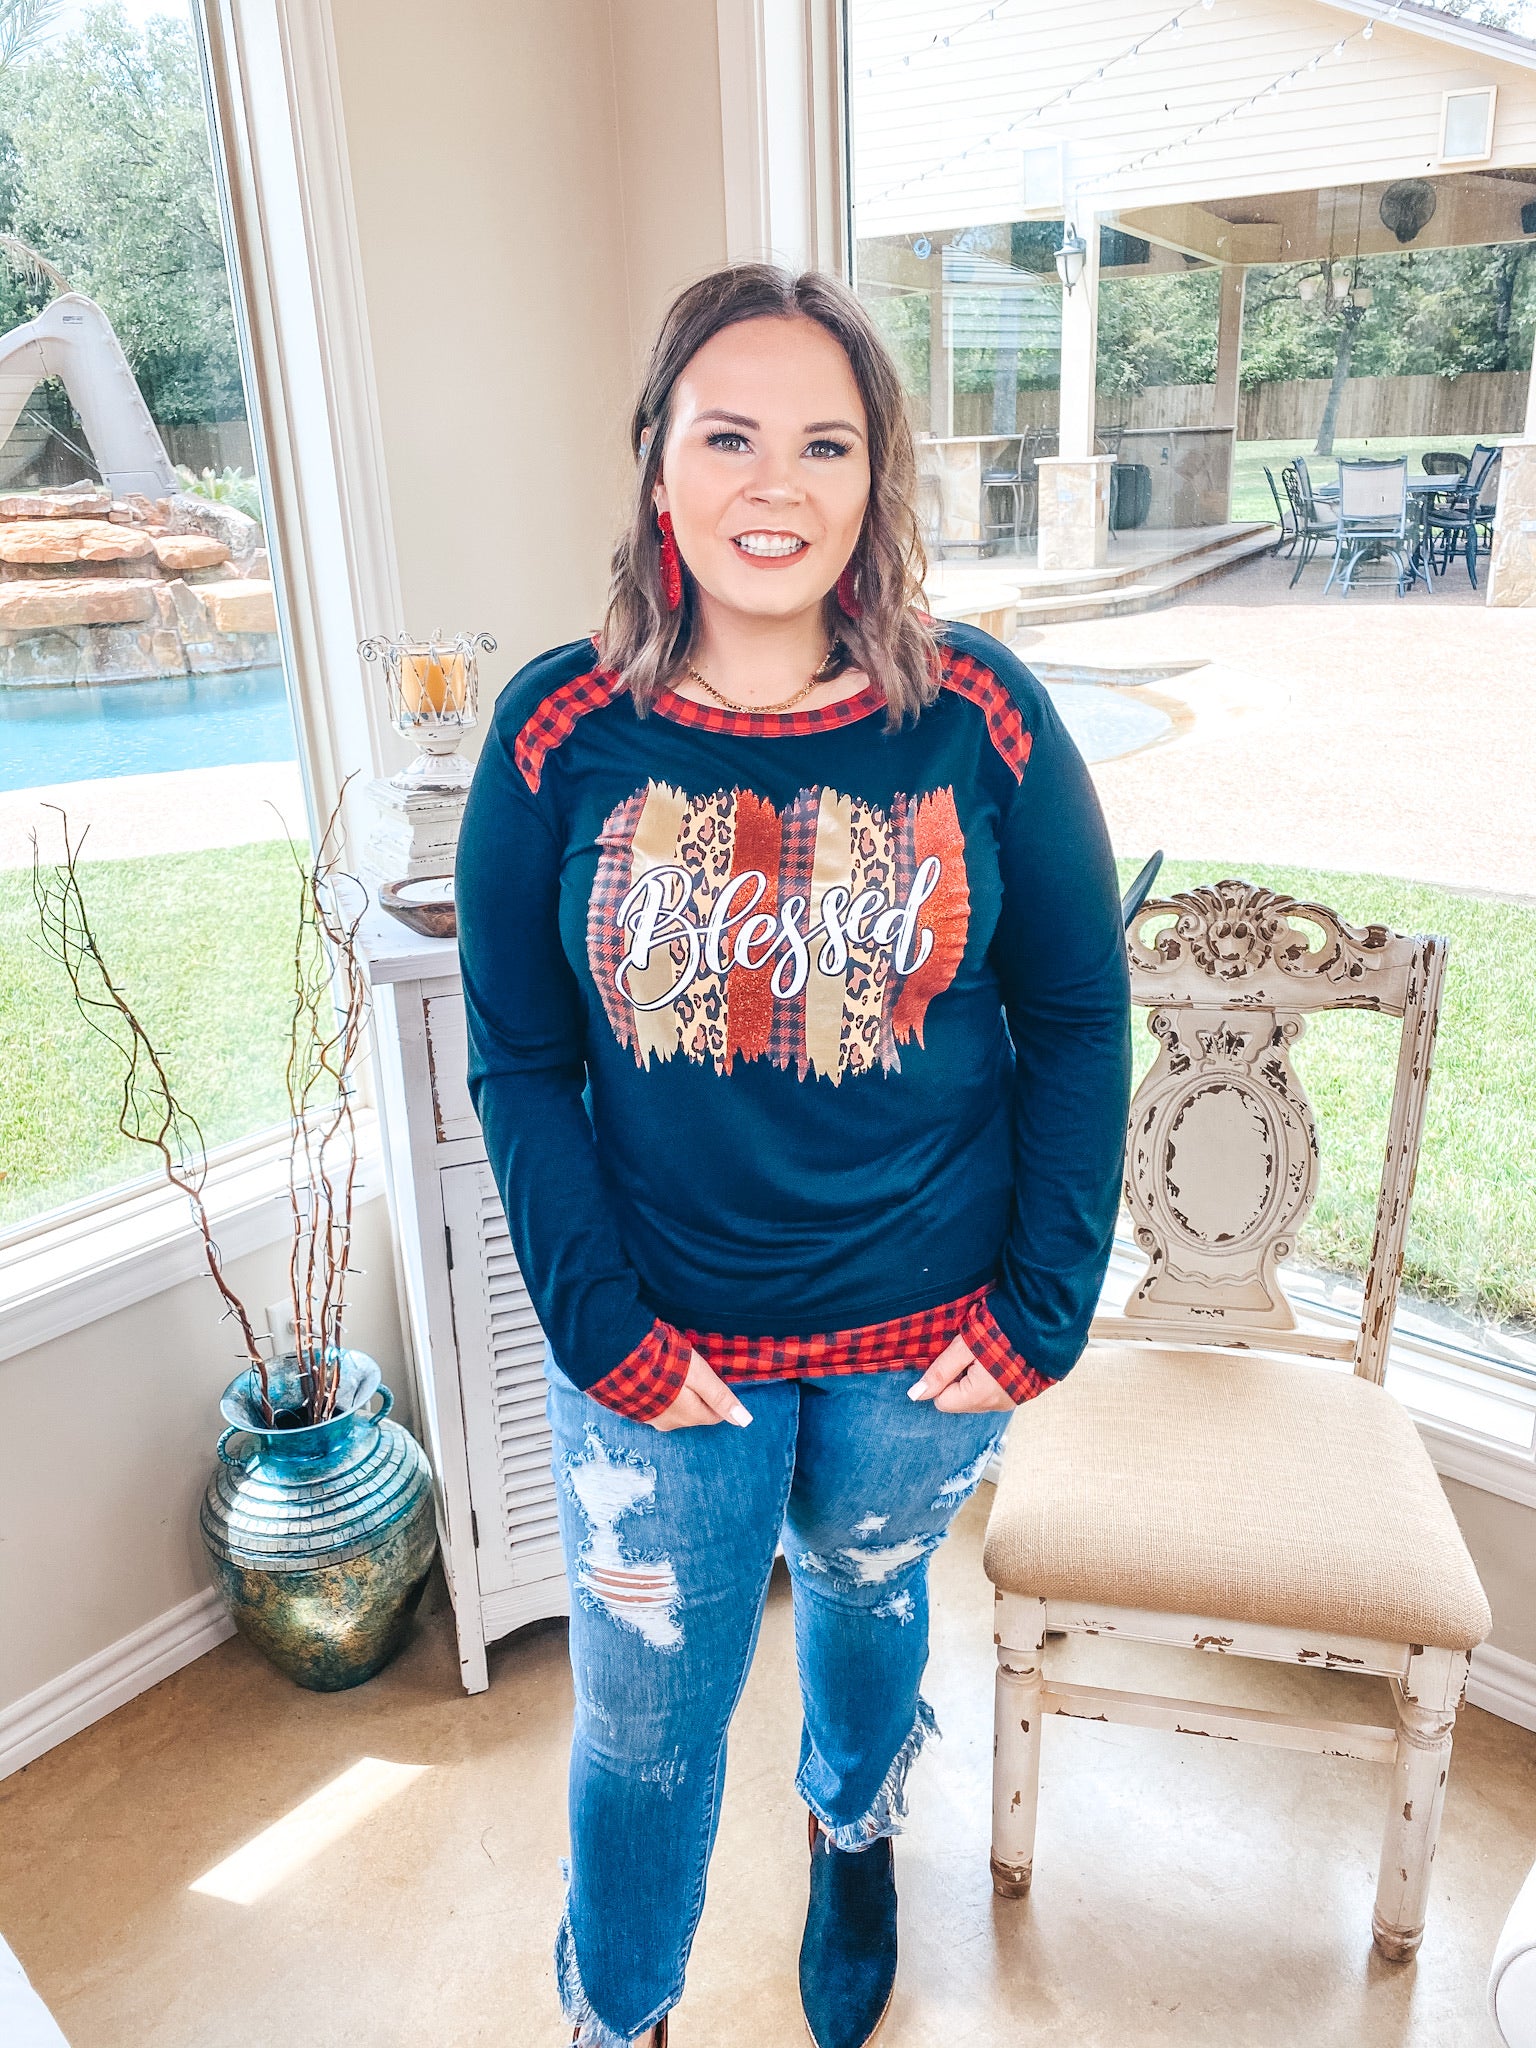 Blessed Mixed Pattern Graphic Tee with Buffalo Plaid Trim in Black - Giddy Up Glamour Boutique